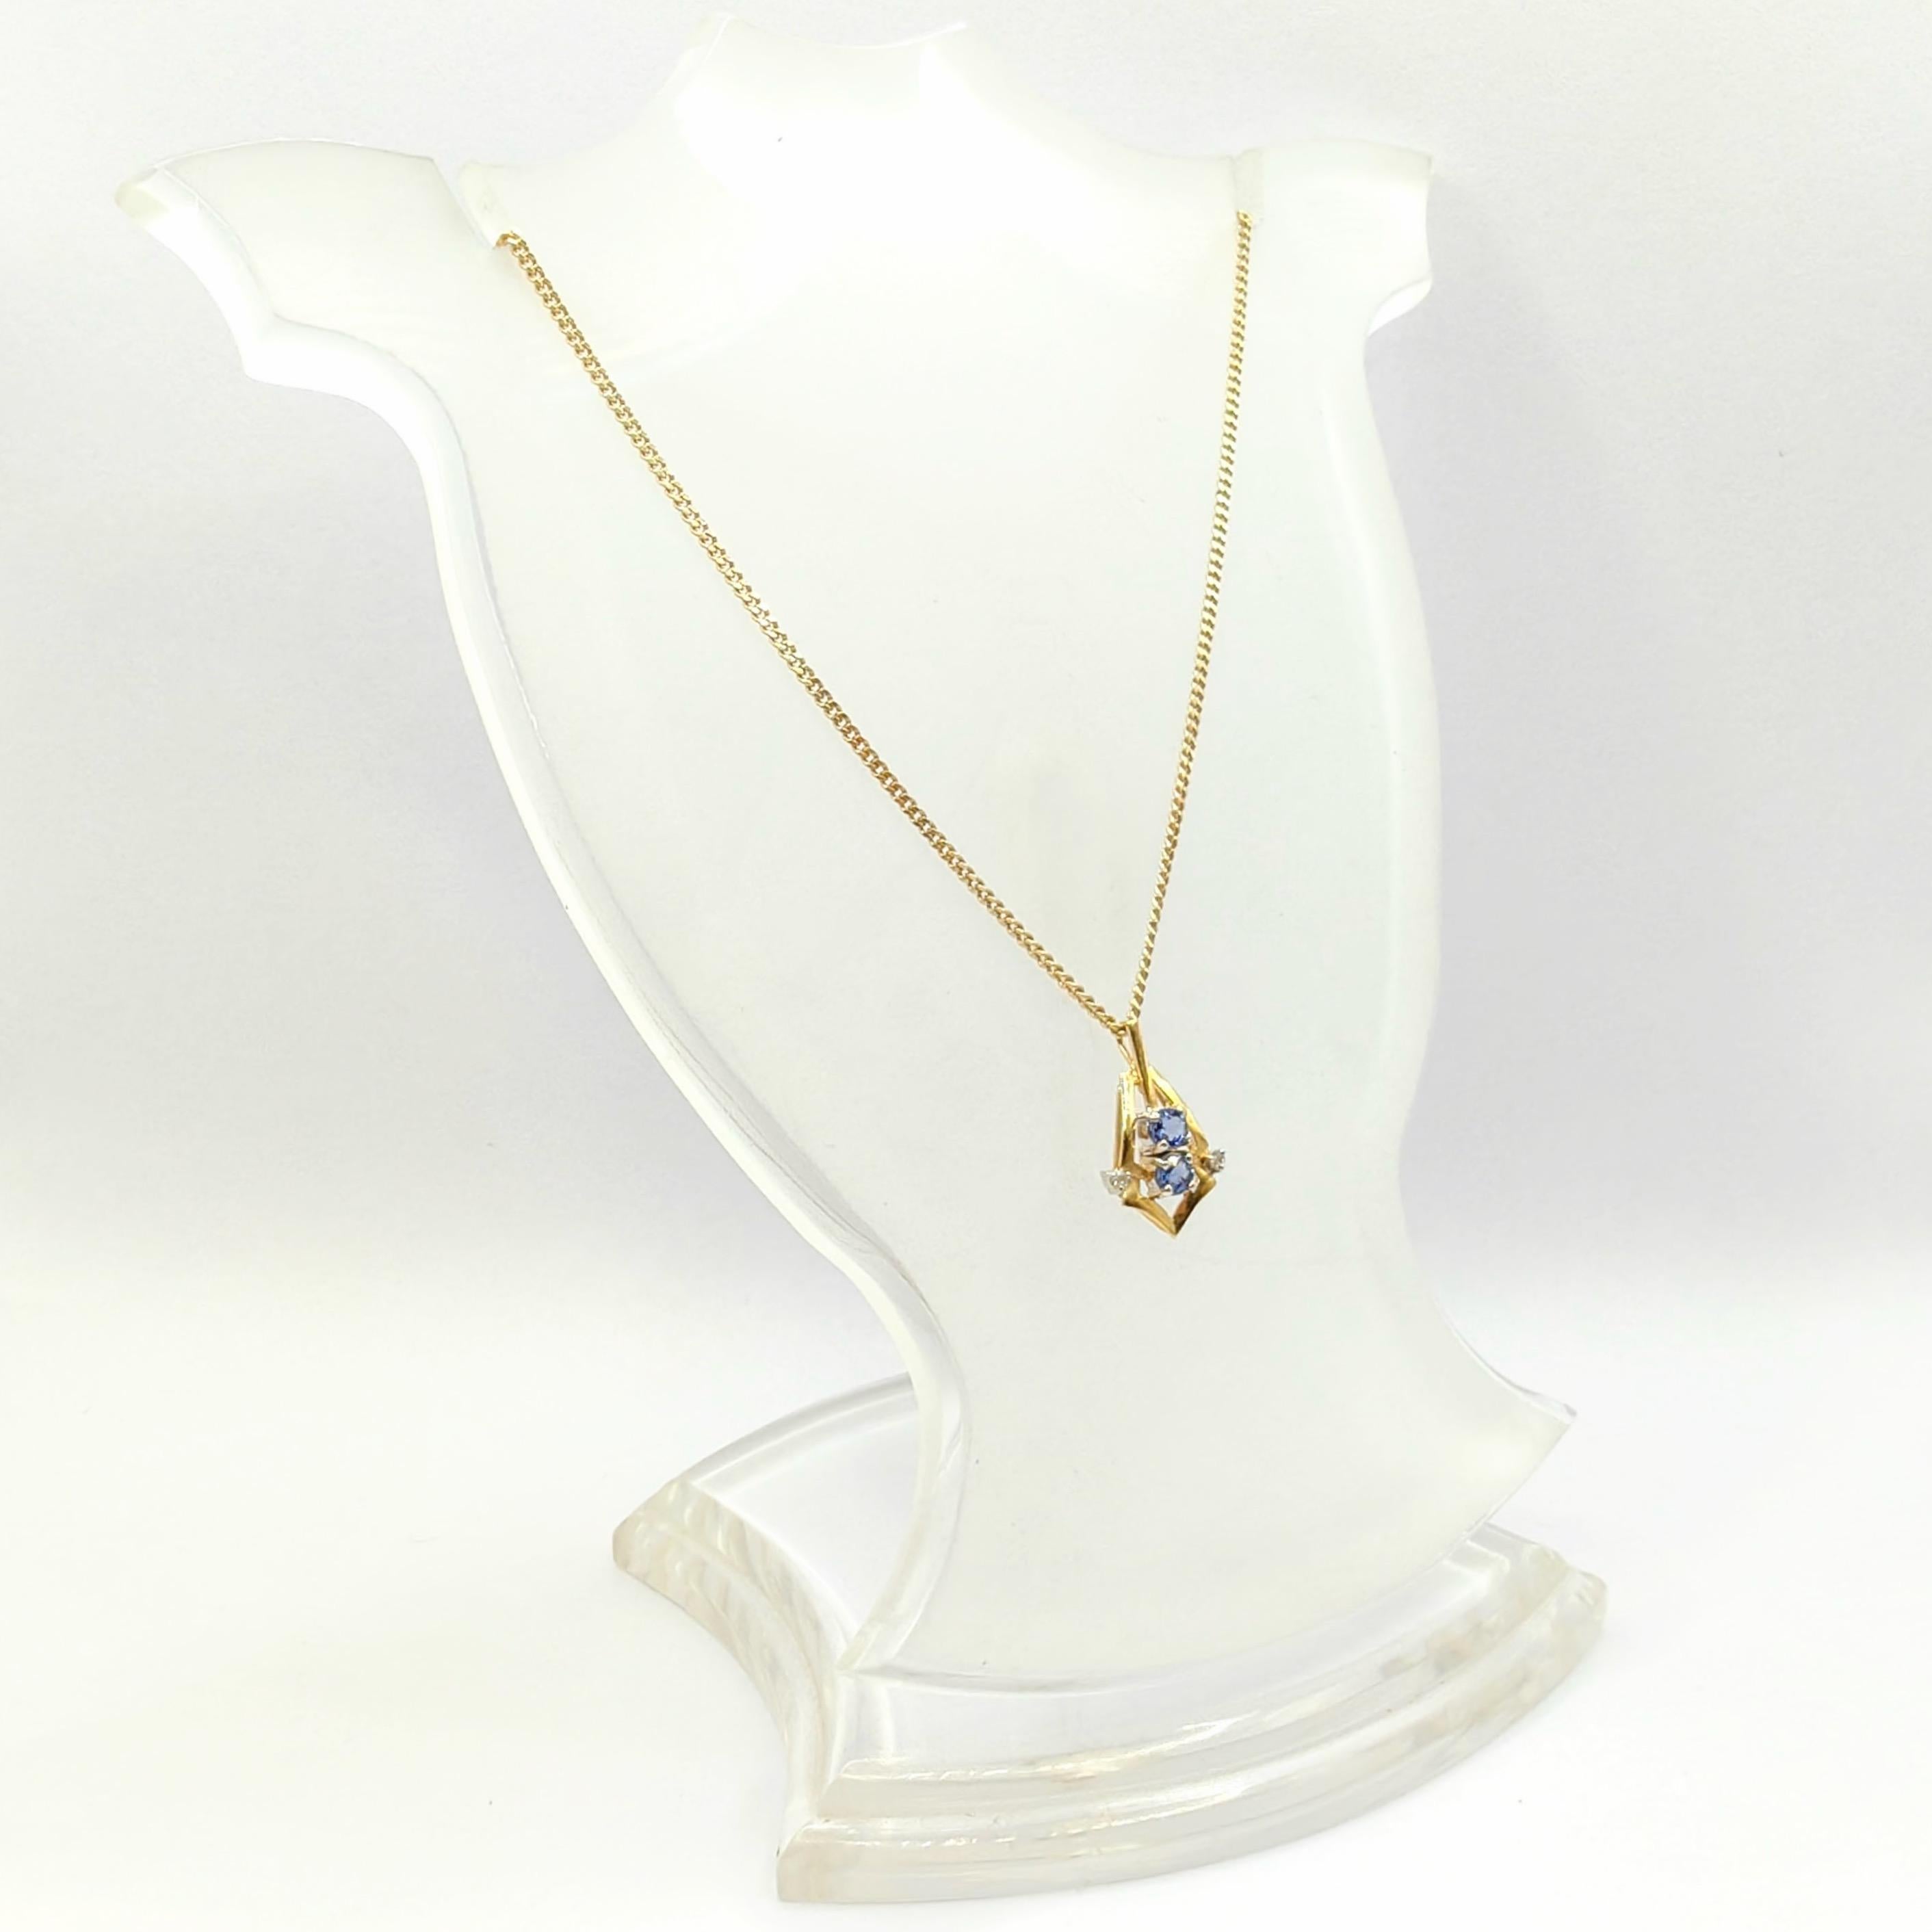 Vintage Natural Pastel Blue Sapphire Diamond Necklace Pendant in 14K Yellow Gold For Sale 2